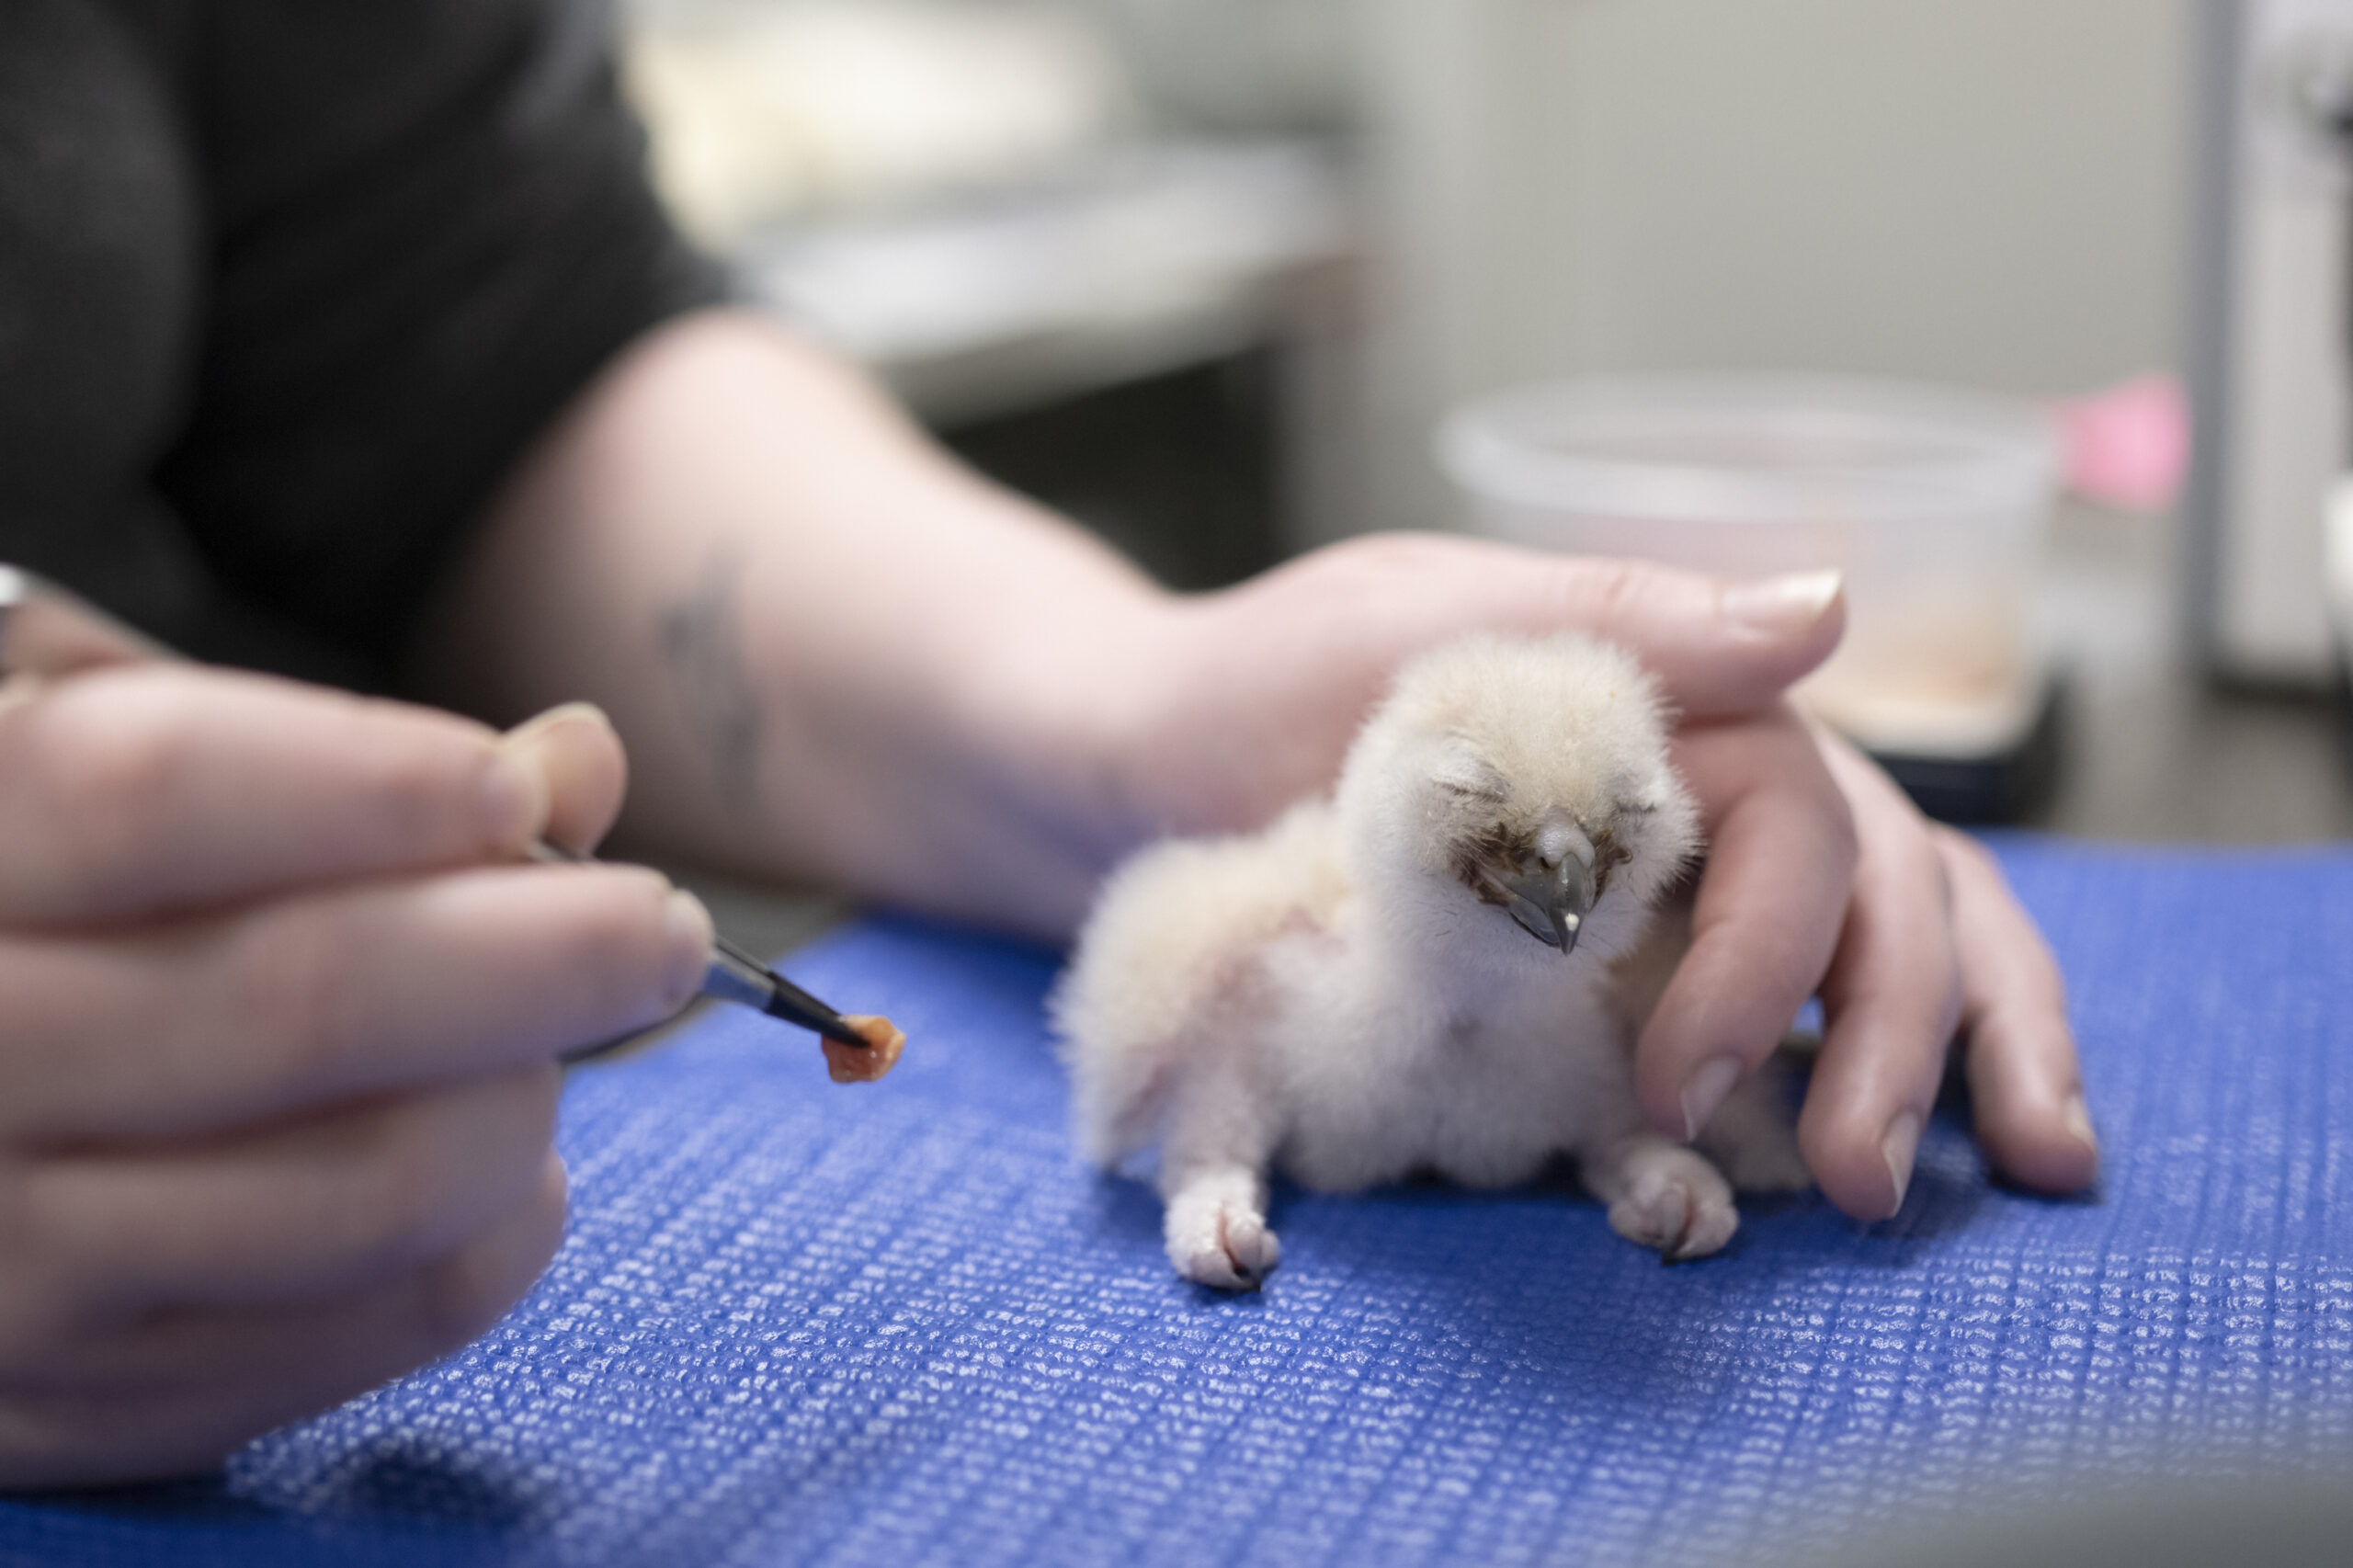 Eurasian Eagle-Owl chick being hand-fed by a National Aviary expert.